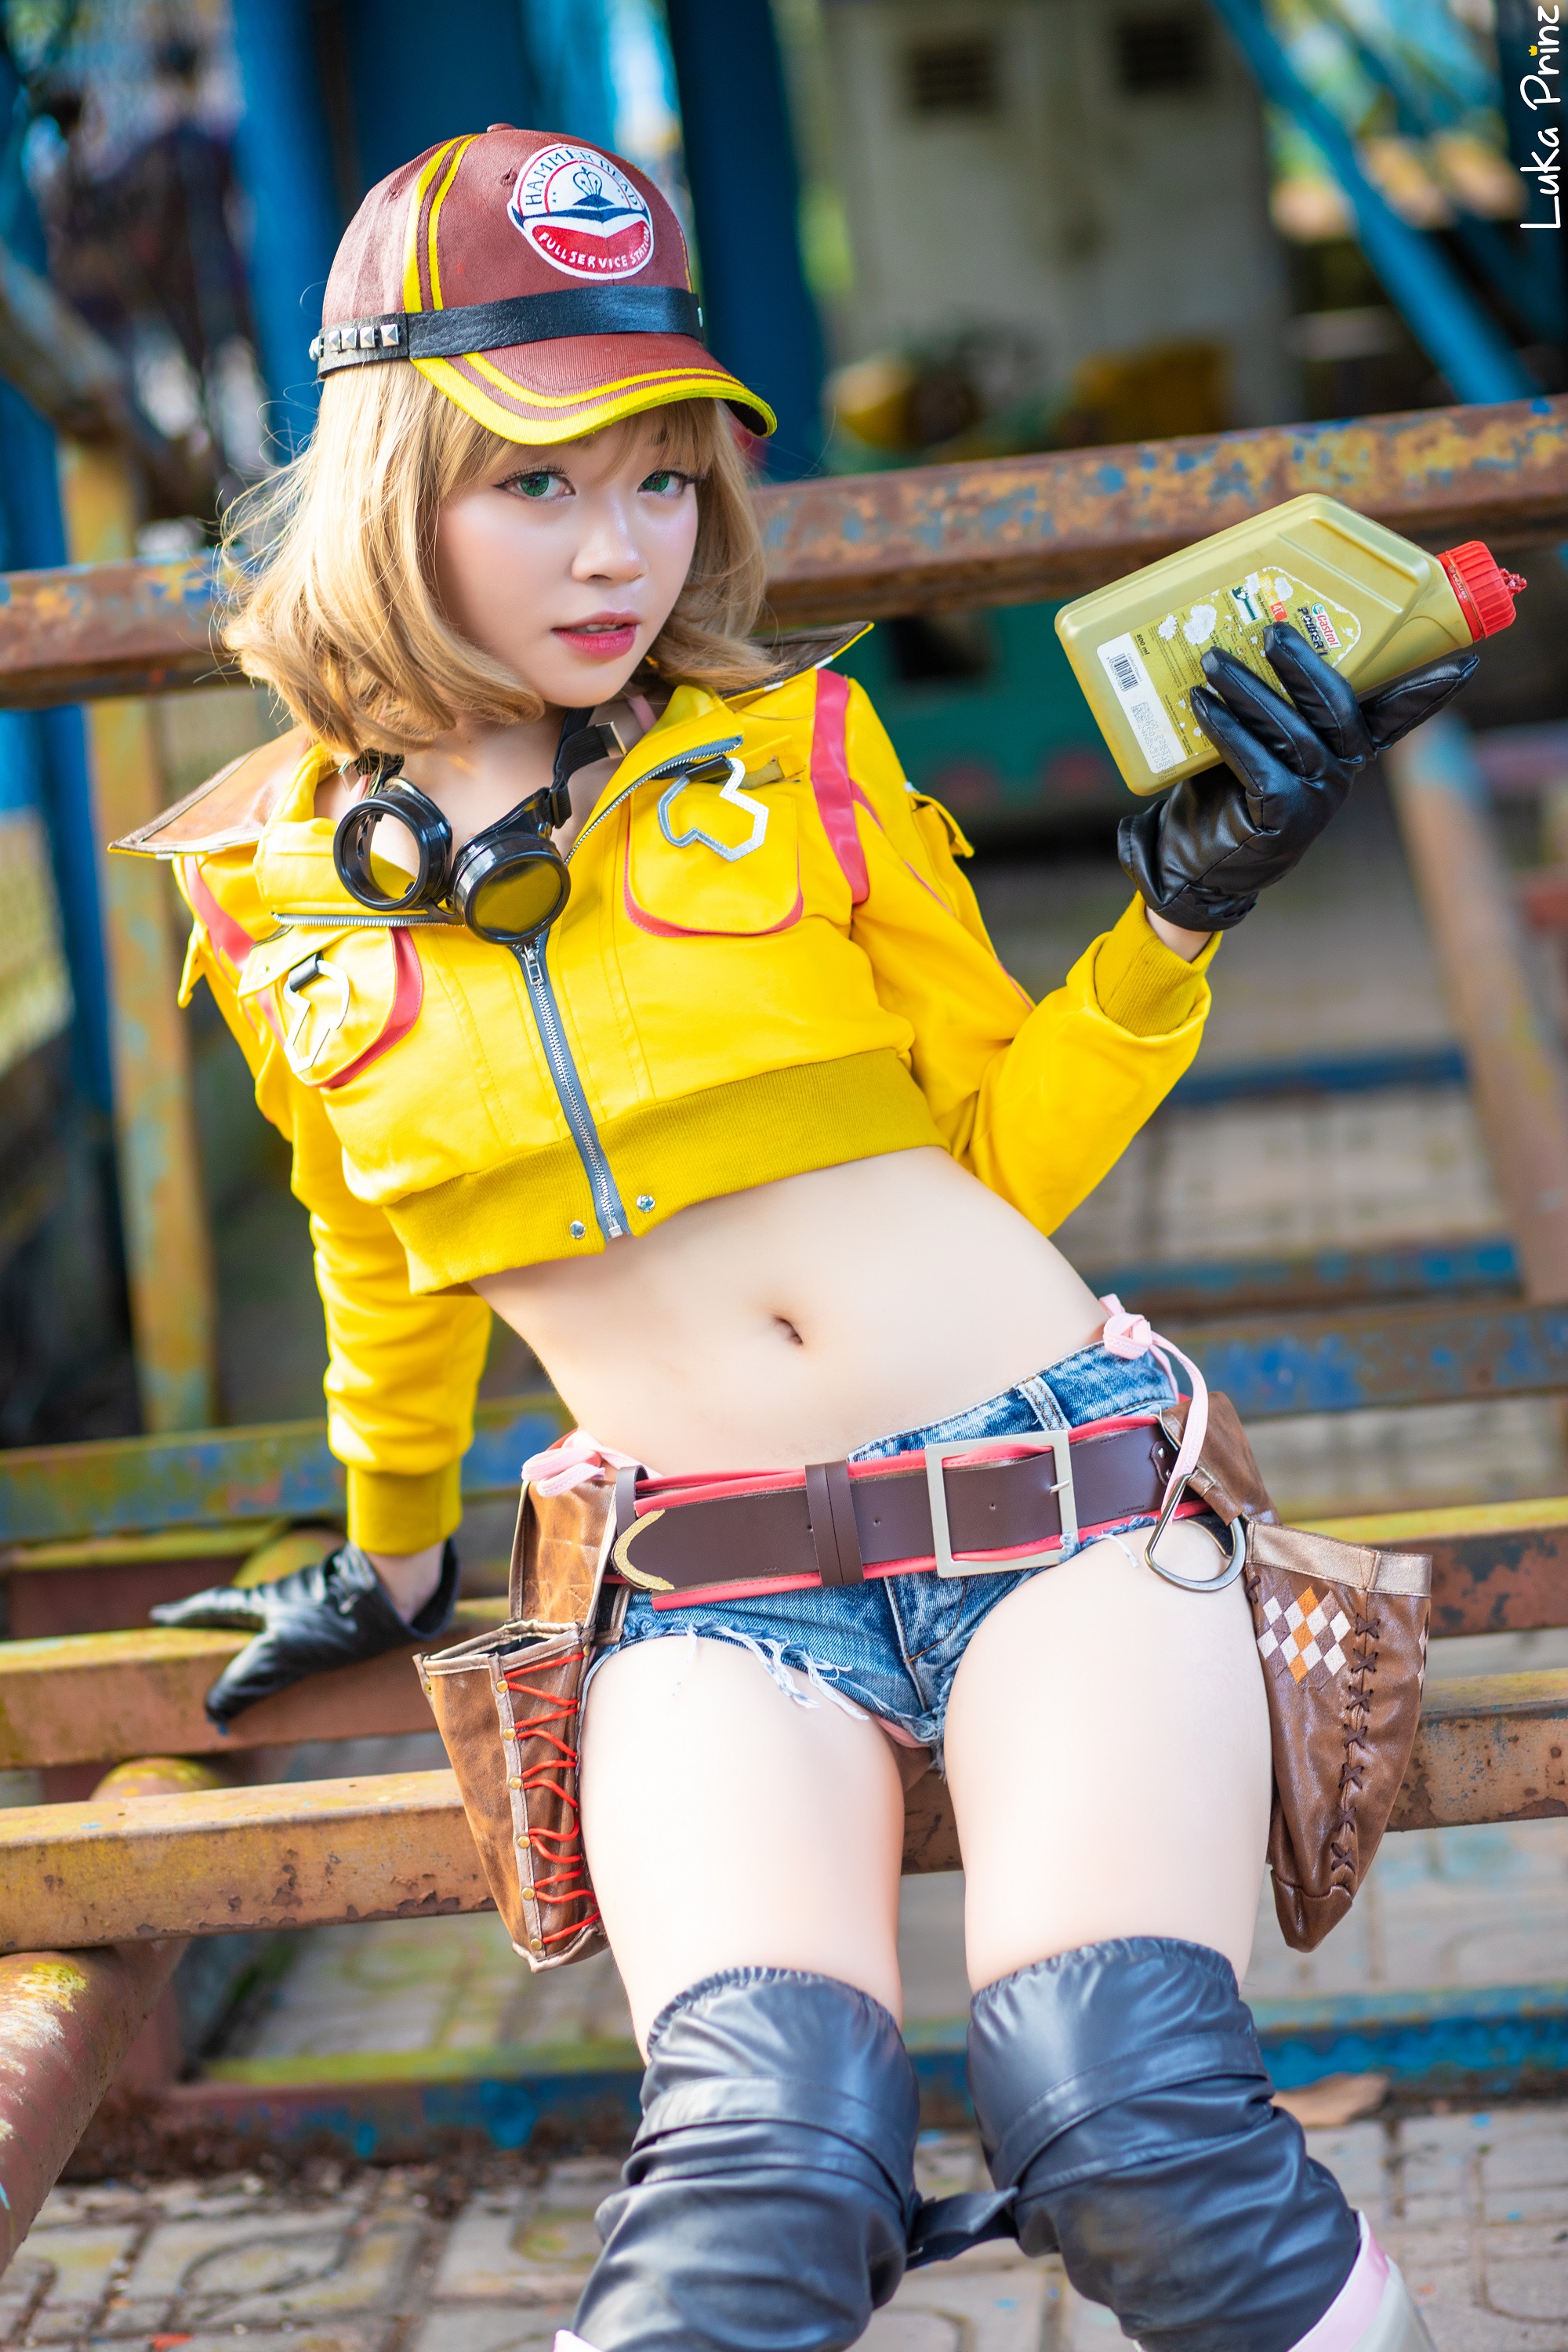 People 2000x3000 Asian women model blonde cosplay asian cosplayer Final Fantasy Final Fantasy XV video game girls video games baseball cap goggles jacket yellow jacket jean shorts high waisted shorts gloves belly belt knee-high boots looking at viewer women outdoors sitting portrait display Cindy Aurum